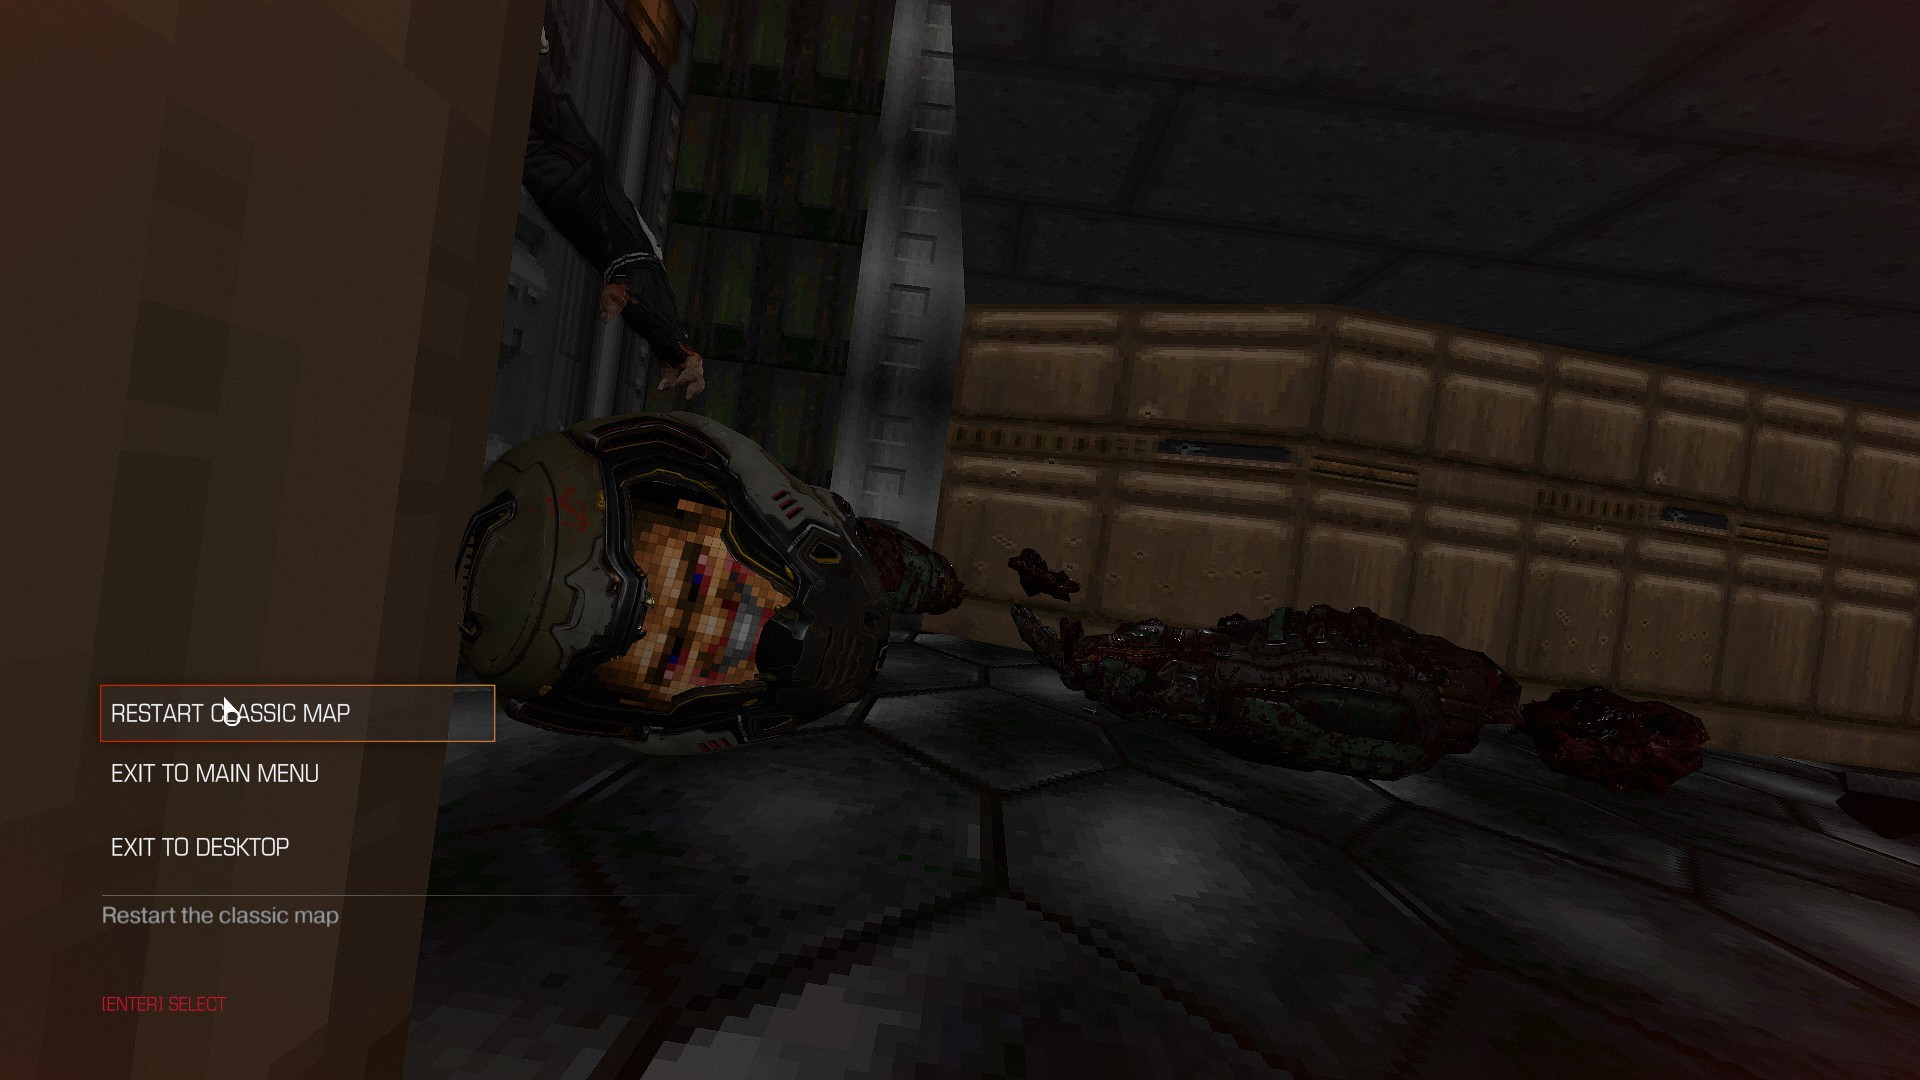 If youre gibbed blown up into tiny chunks and if your camera is facing your decapitated helmet, youll get a glimpse of the classic DOOM guys face